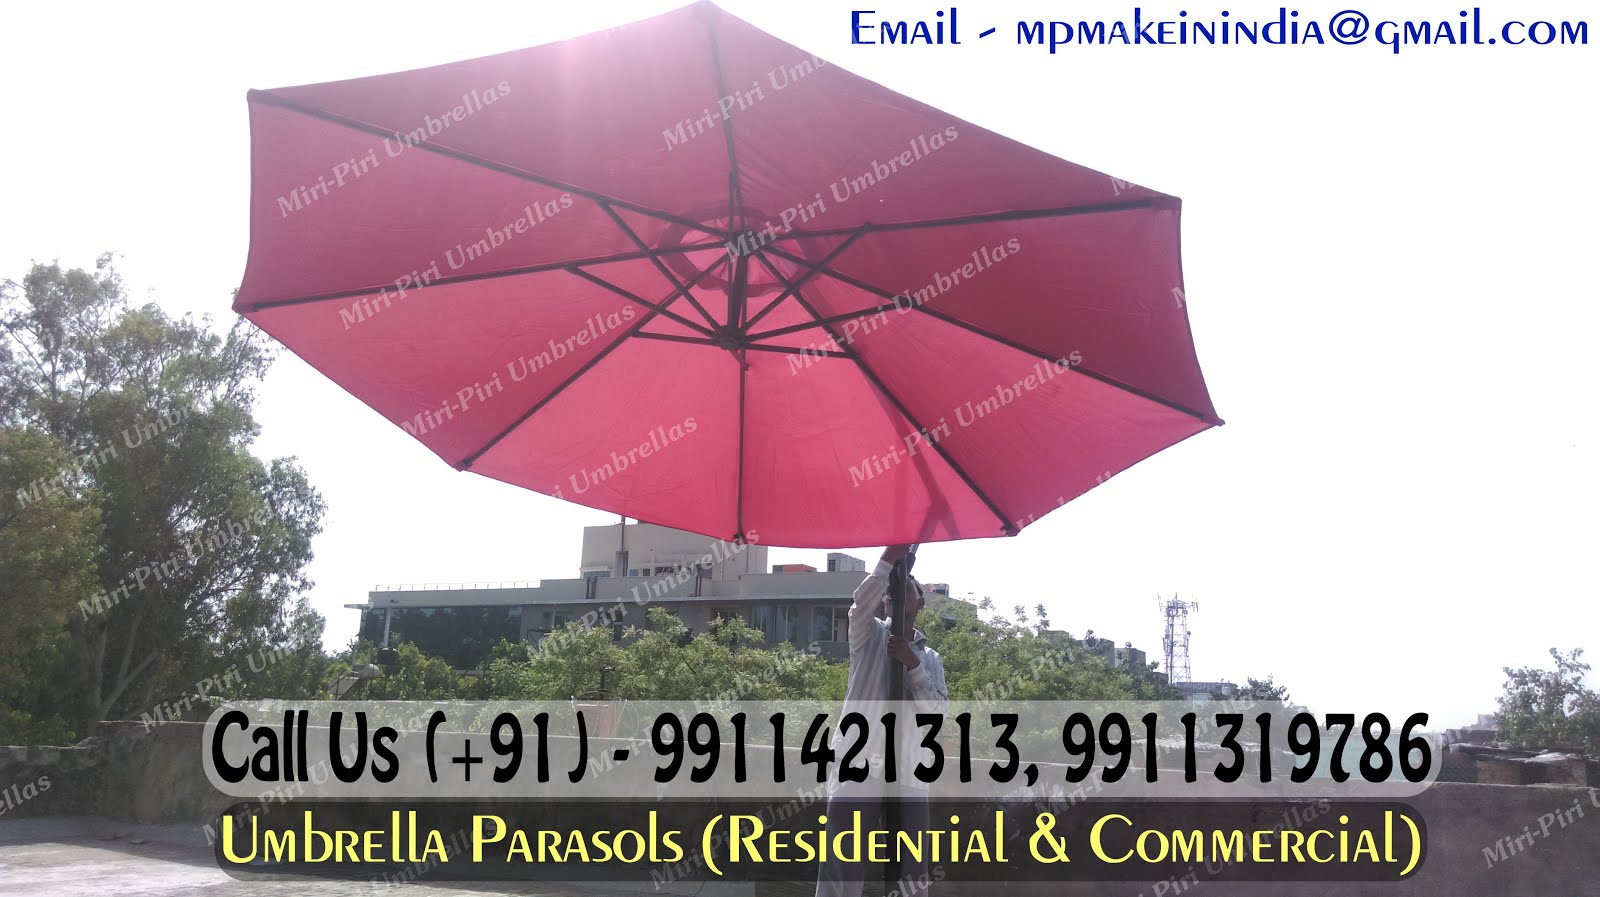 Poolside Cantilever Umbrella - Manufacturing Companies, Producers, Production Center in India